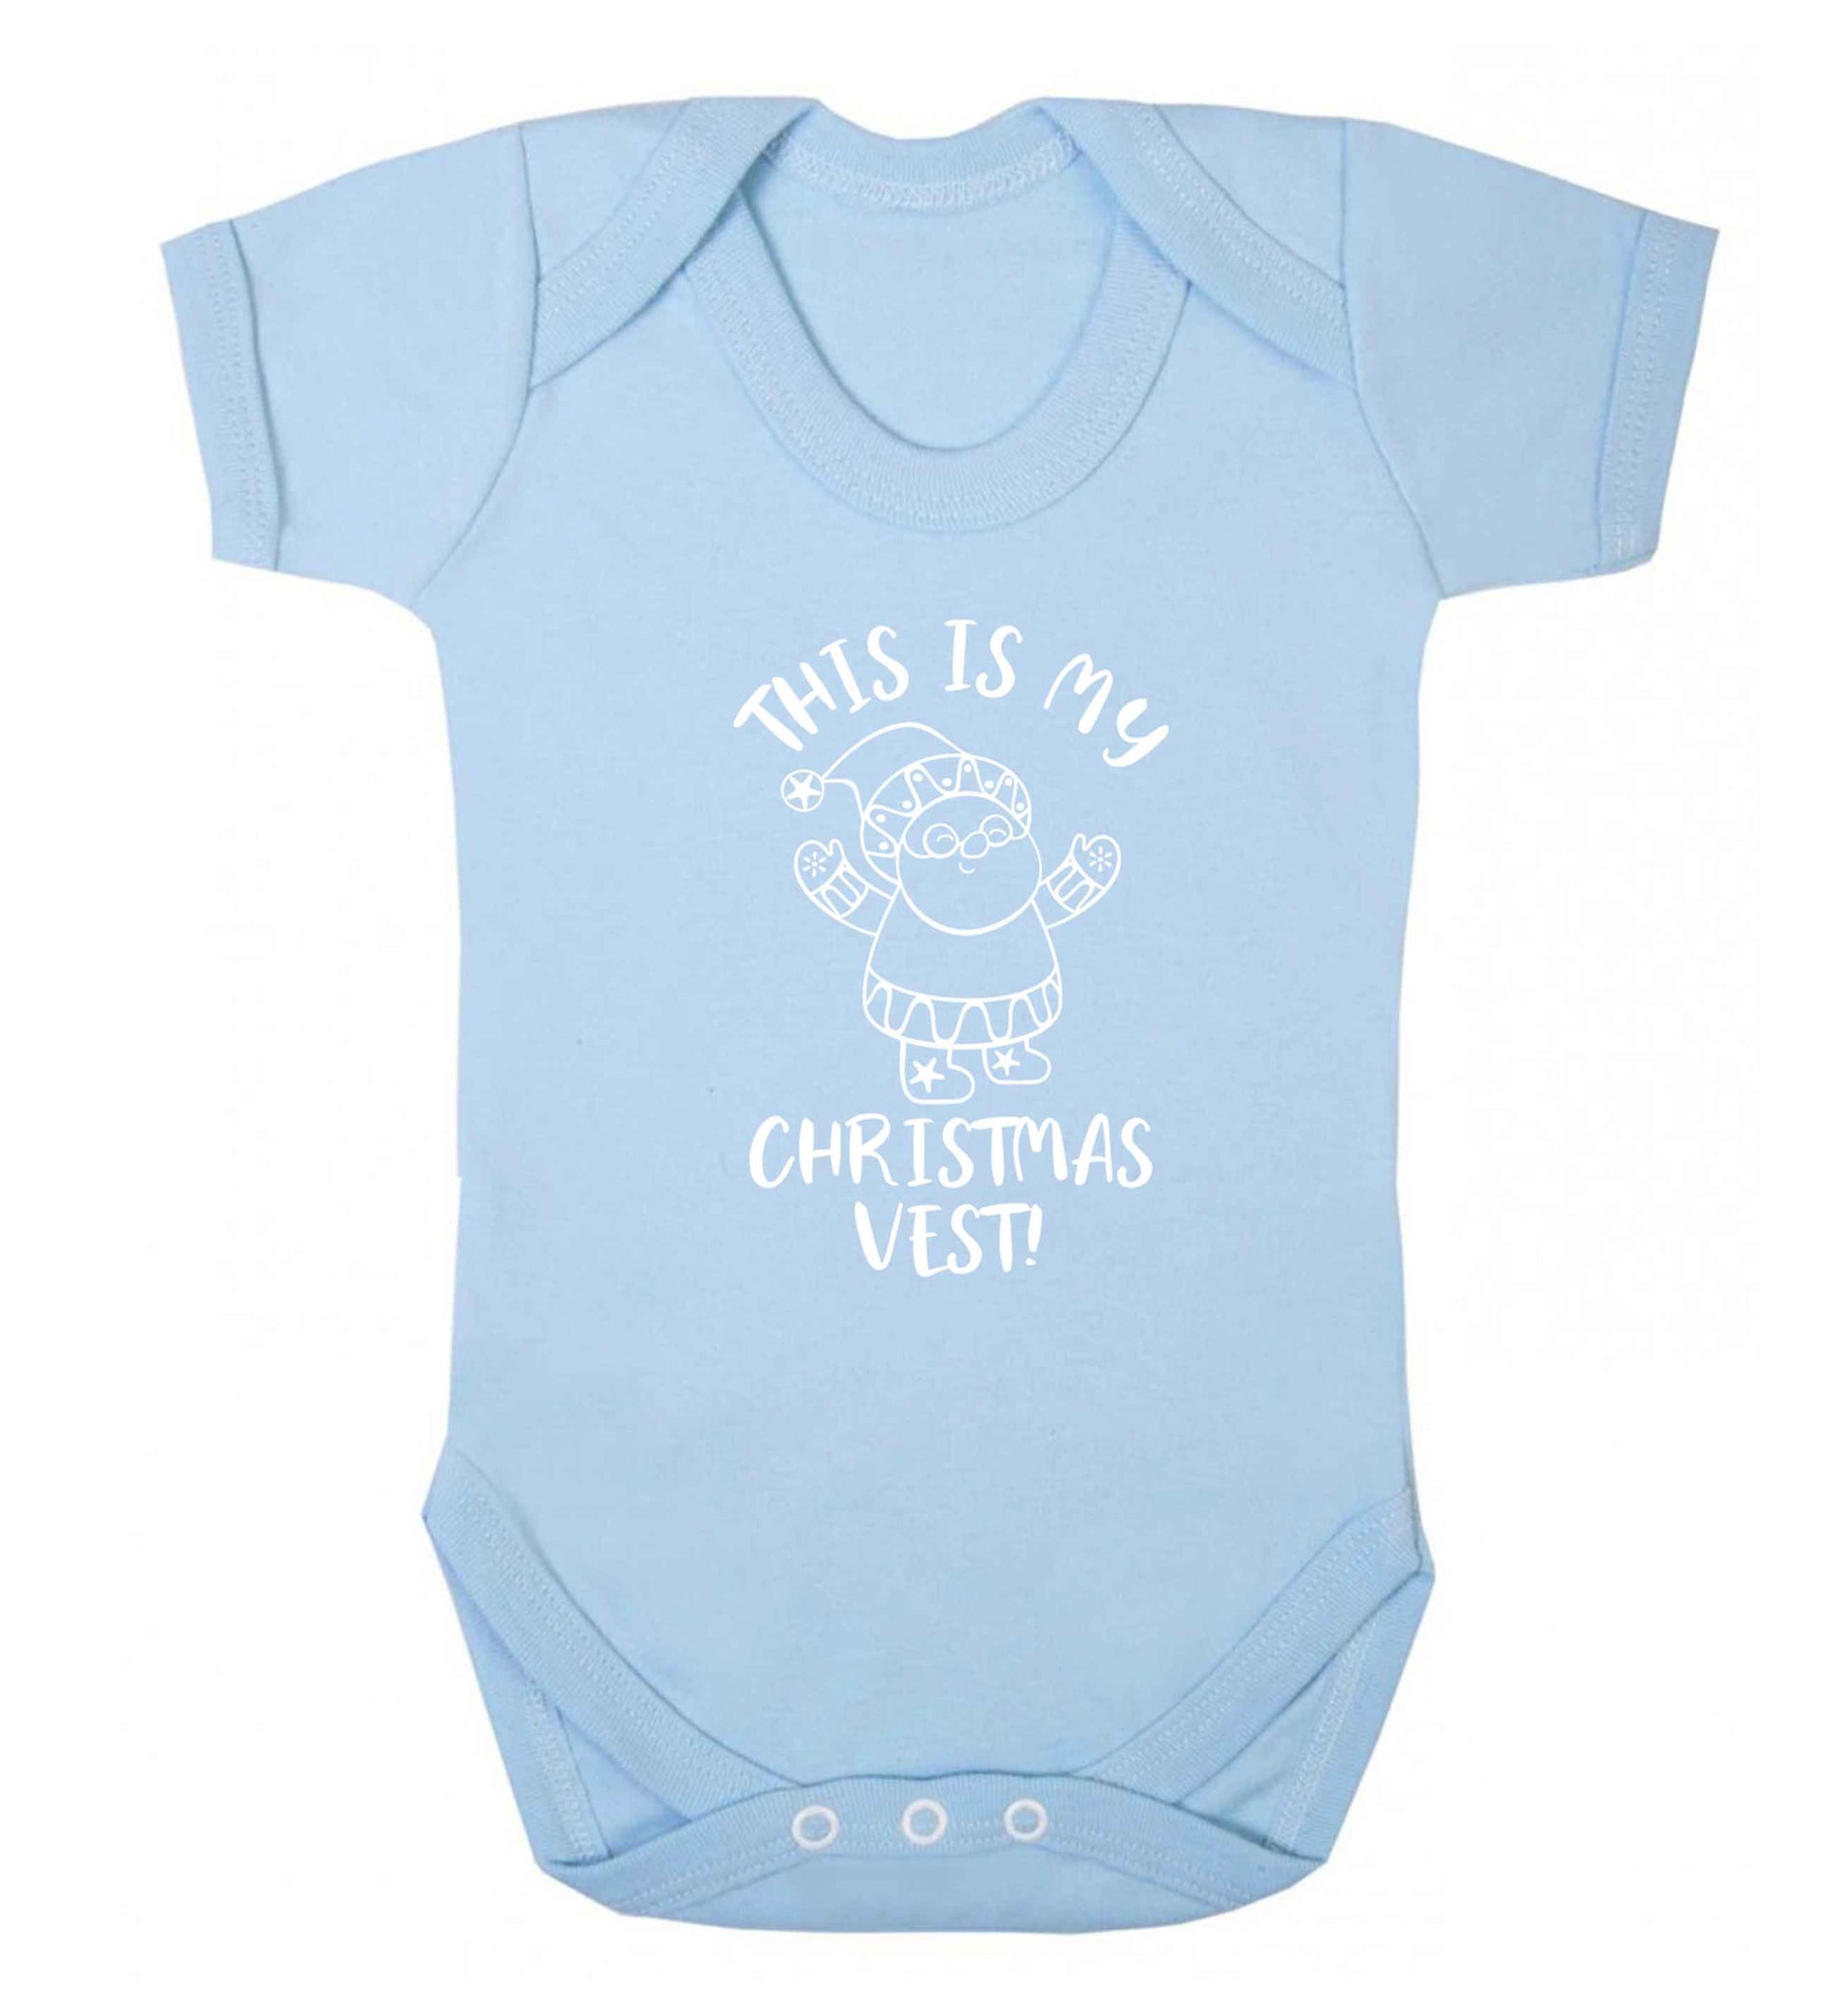 This is my Christmas vest Baby Vest pale blue 18-24 months